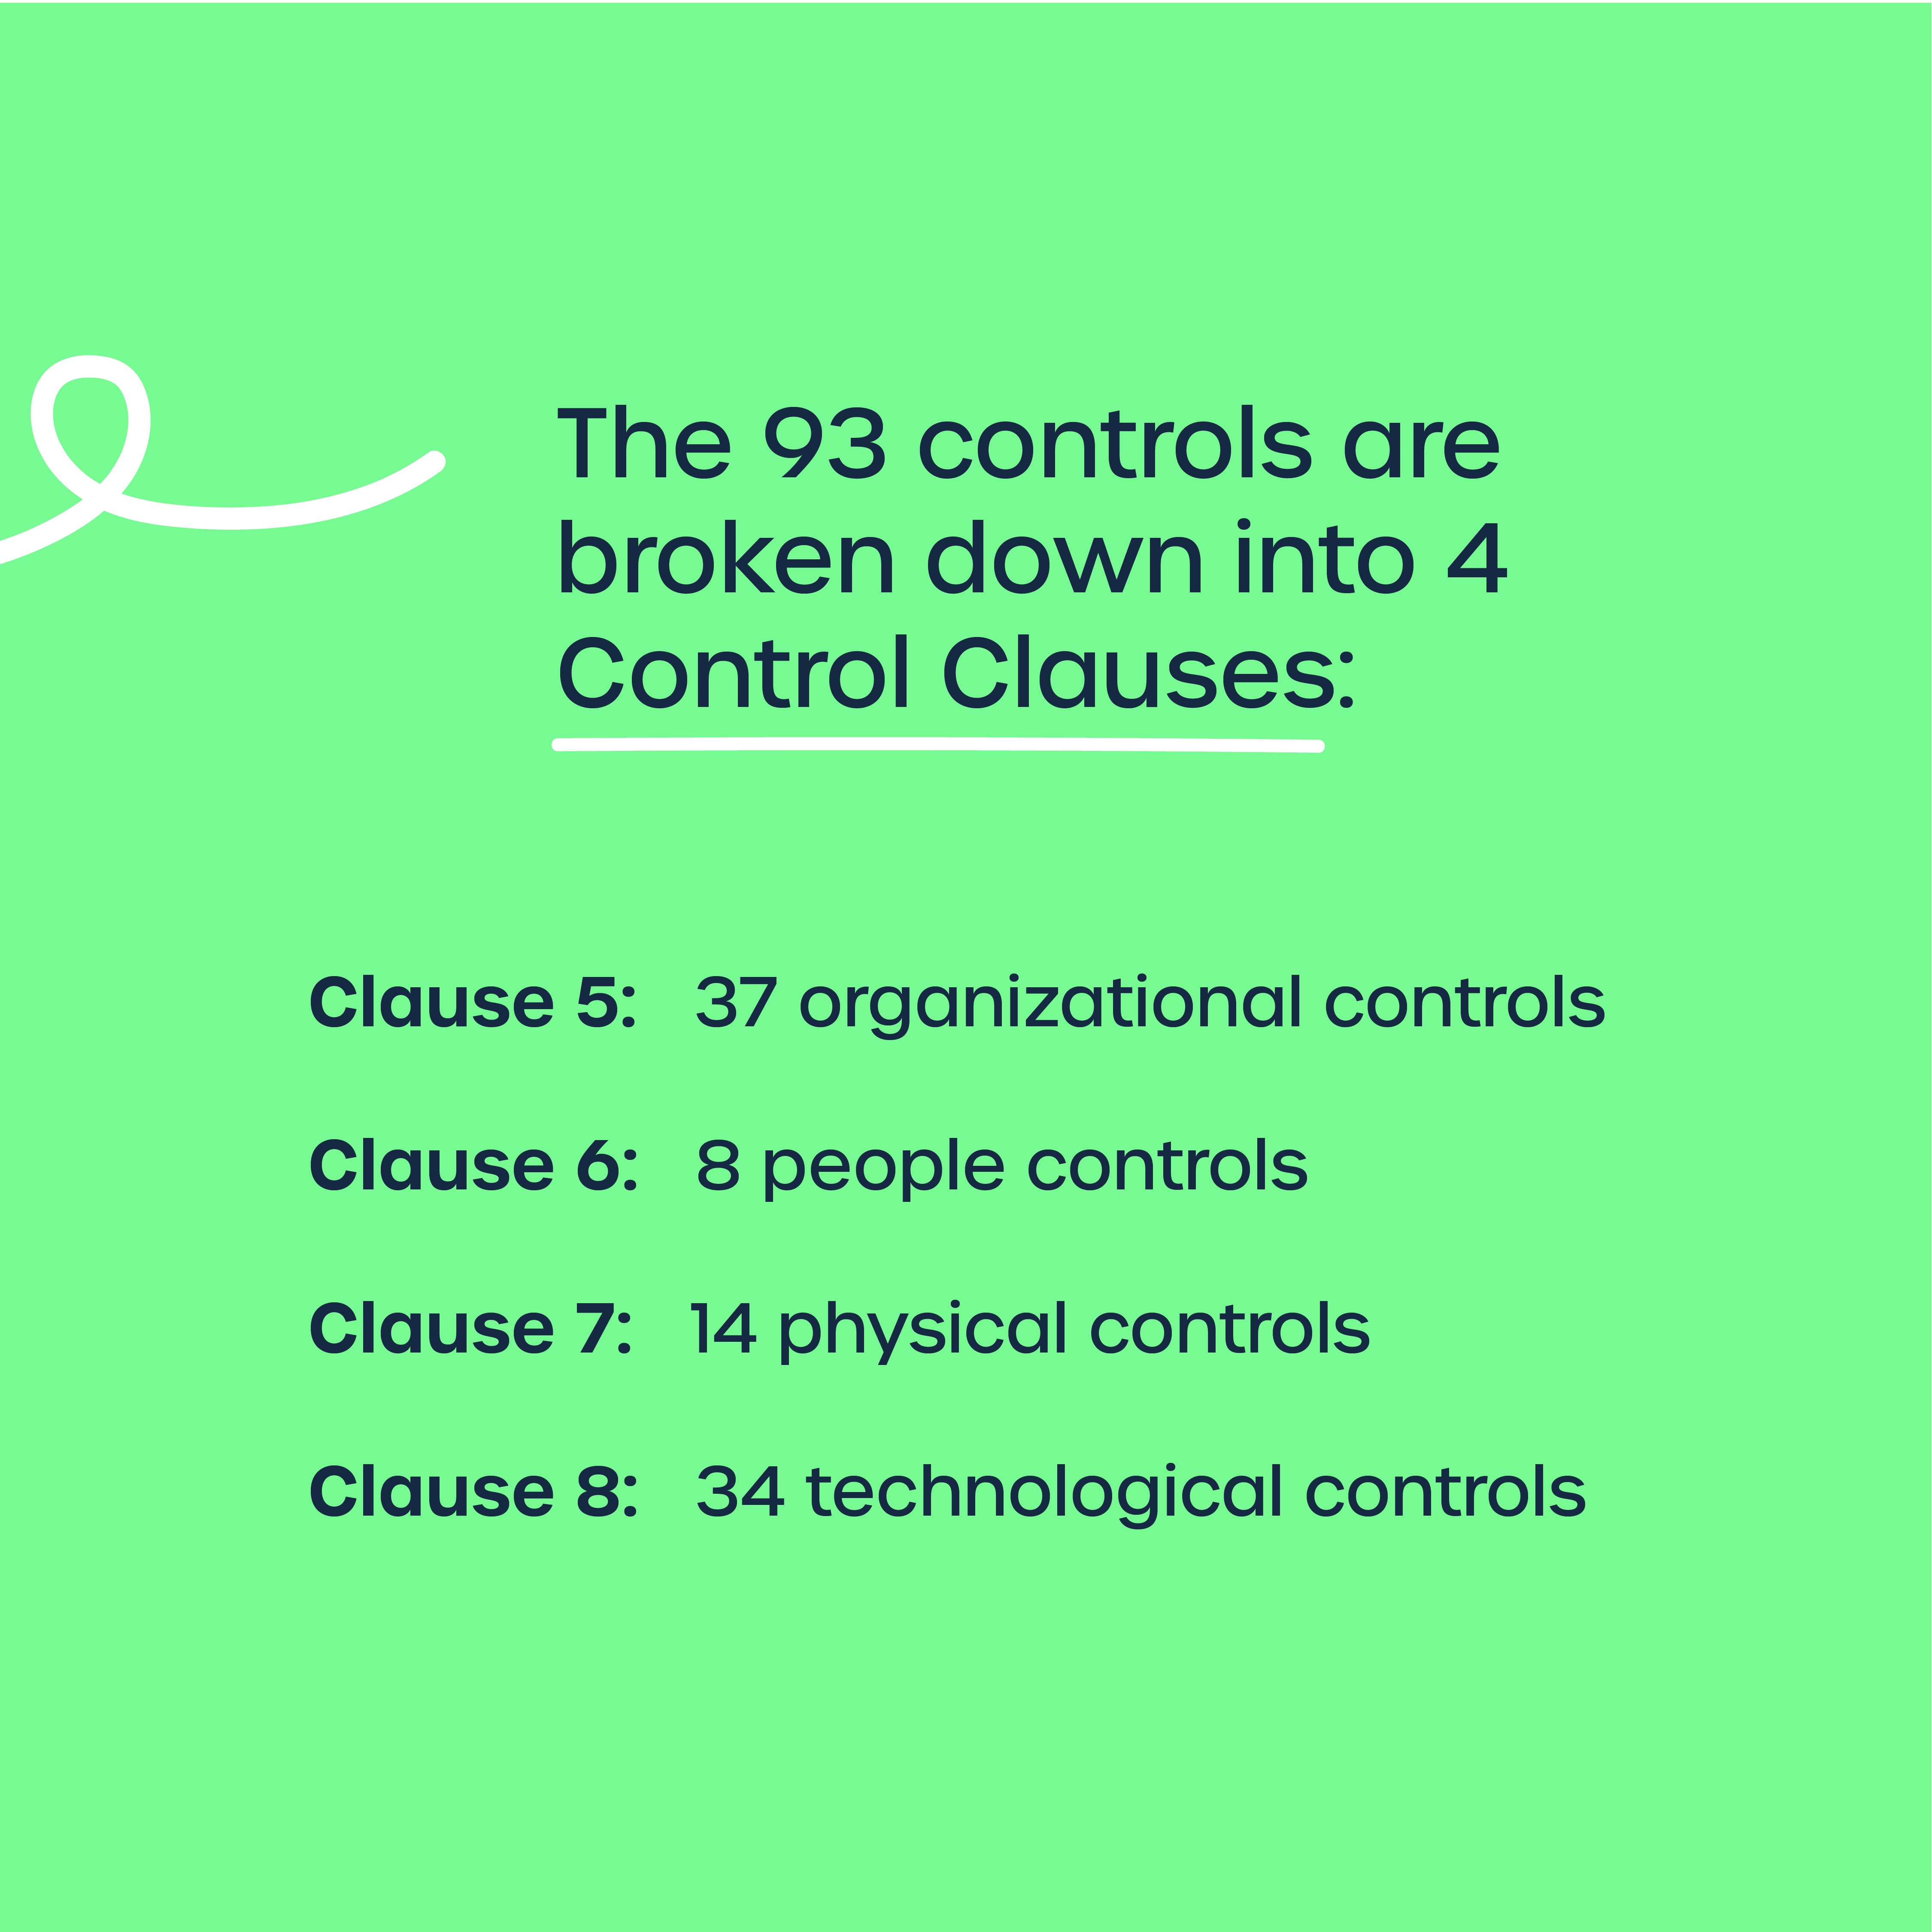 Four control clauses